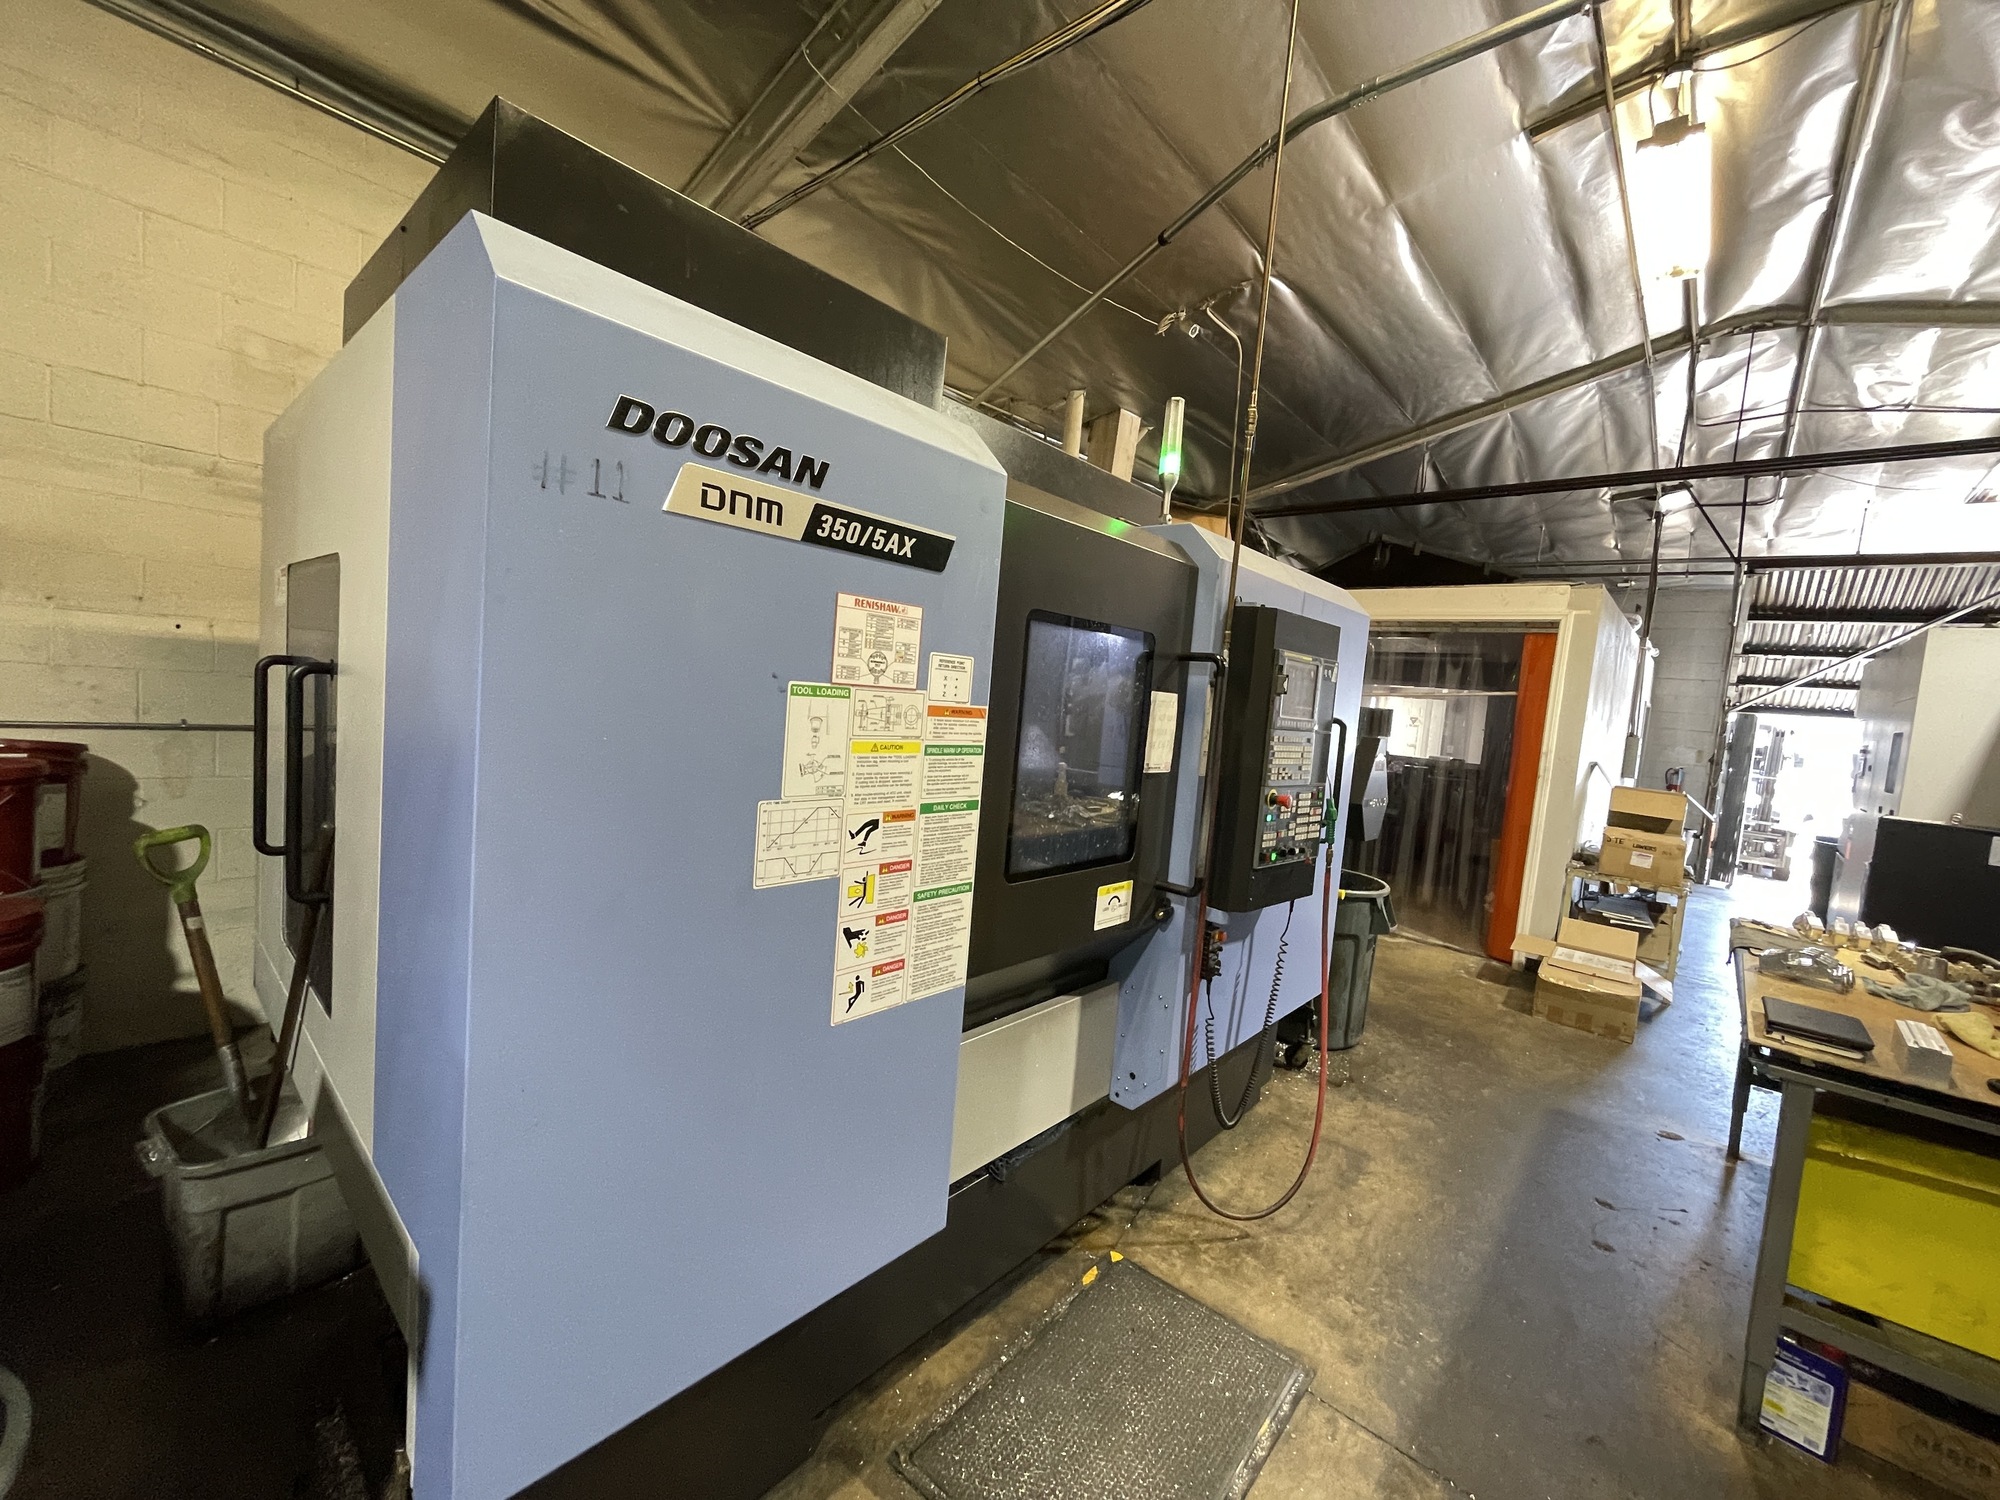 2016 DOOSAN DNM 350/5AX Vertical Machining Centers (5-Axis or More) | PM Machines